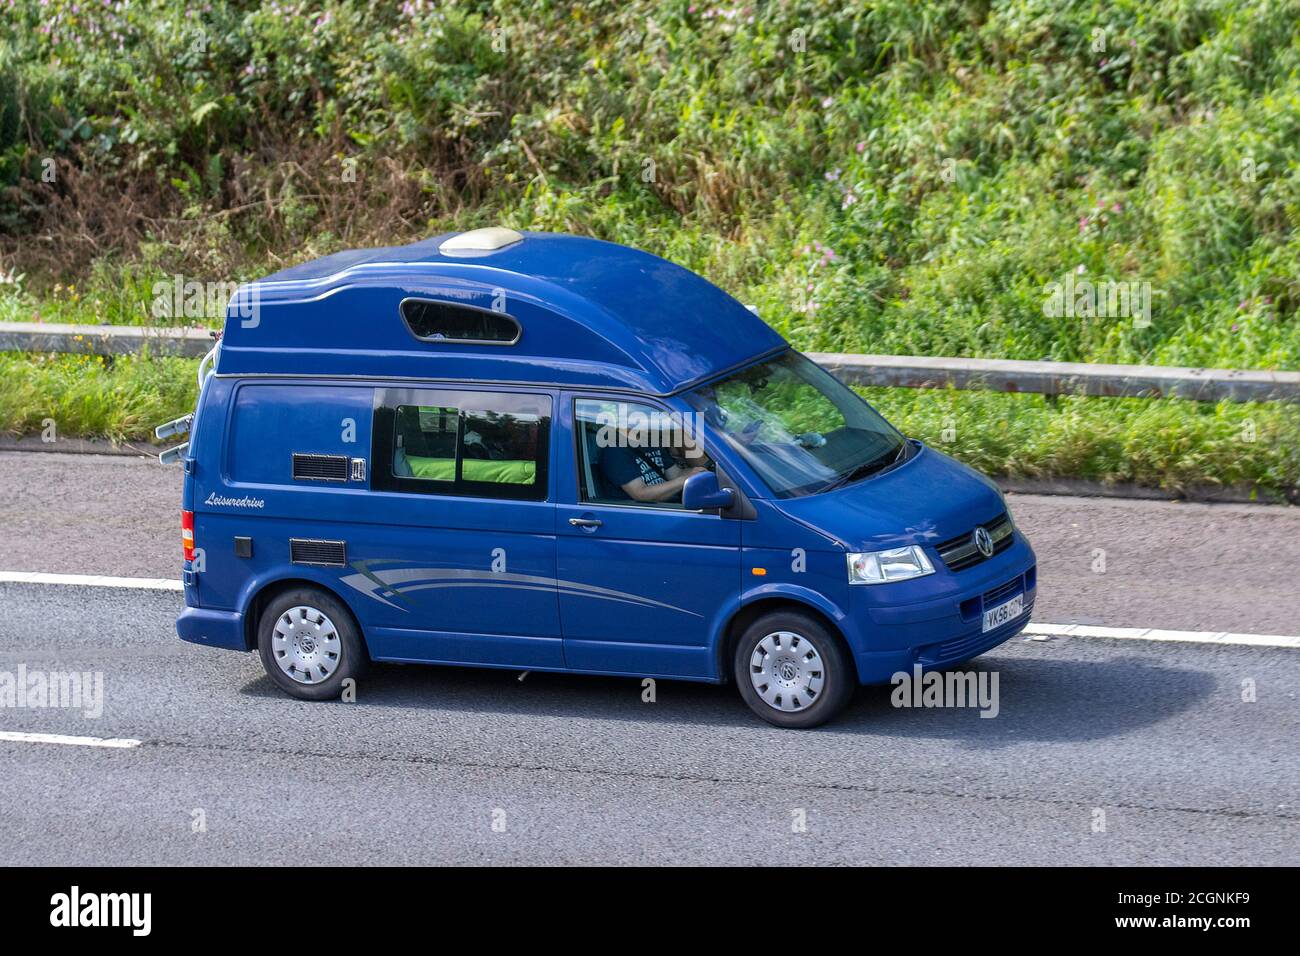 VW VolkswagenT6 van with factory fitted hi-top roof  Vehicular traffic moving vehicles, cars driving vehicle on UK roads, Leisuredrive Freespirit motors, motoring on the M6 motorway highway network. Stock Photo